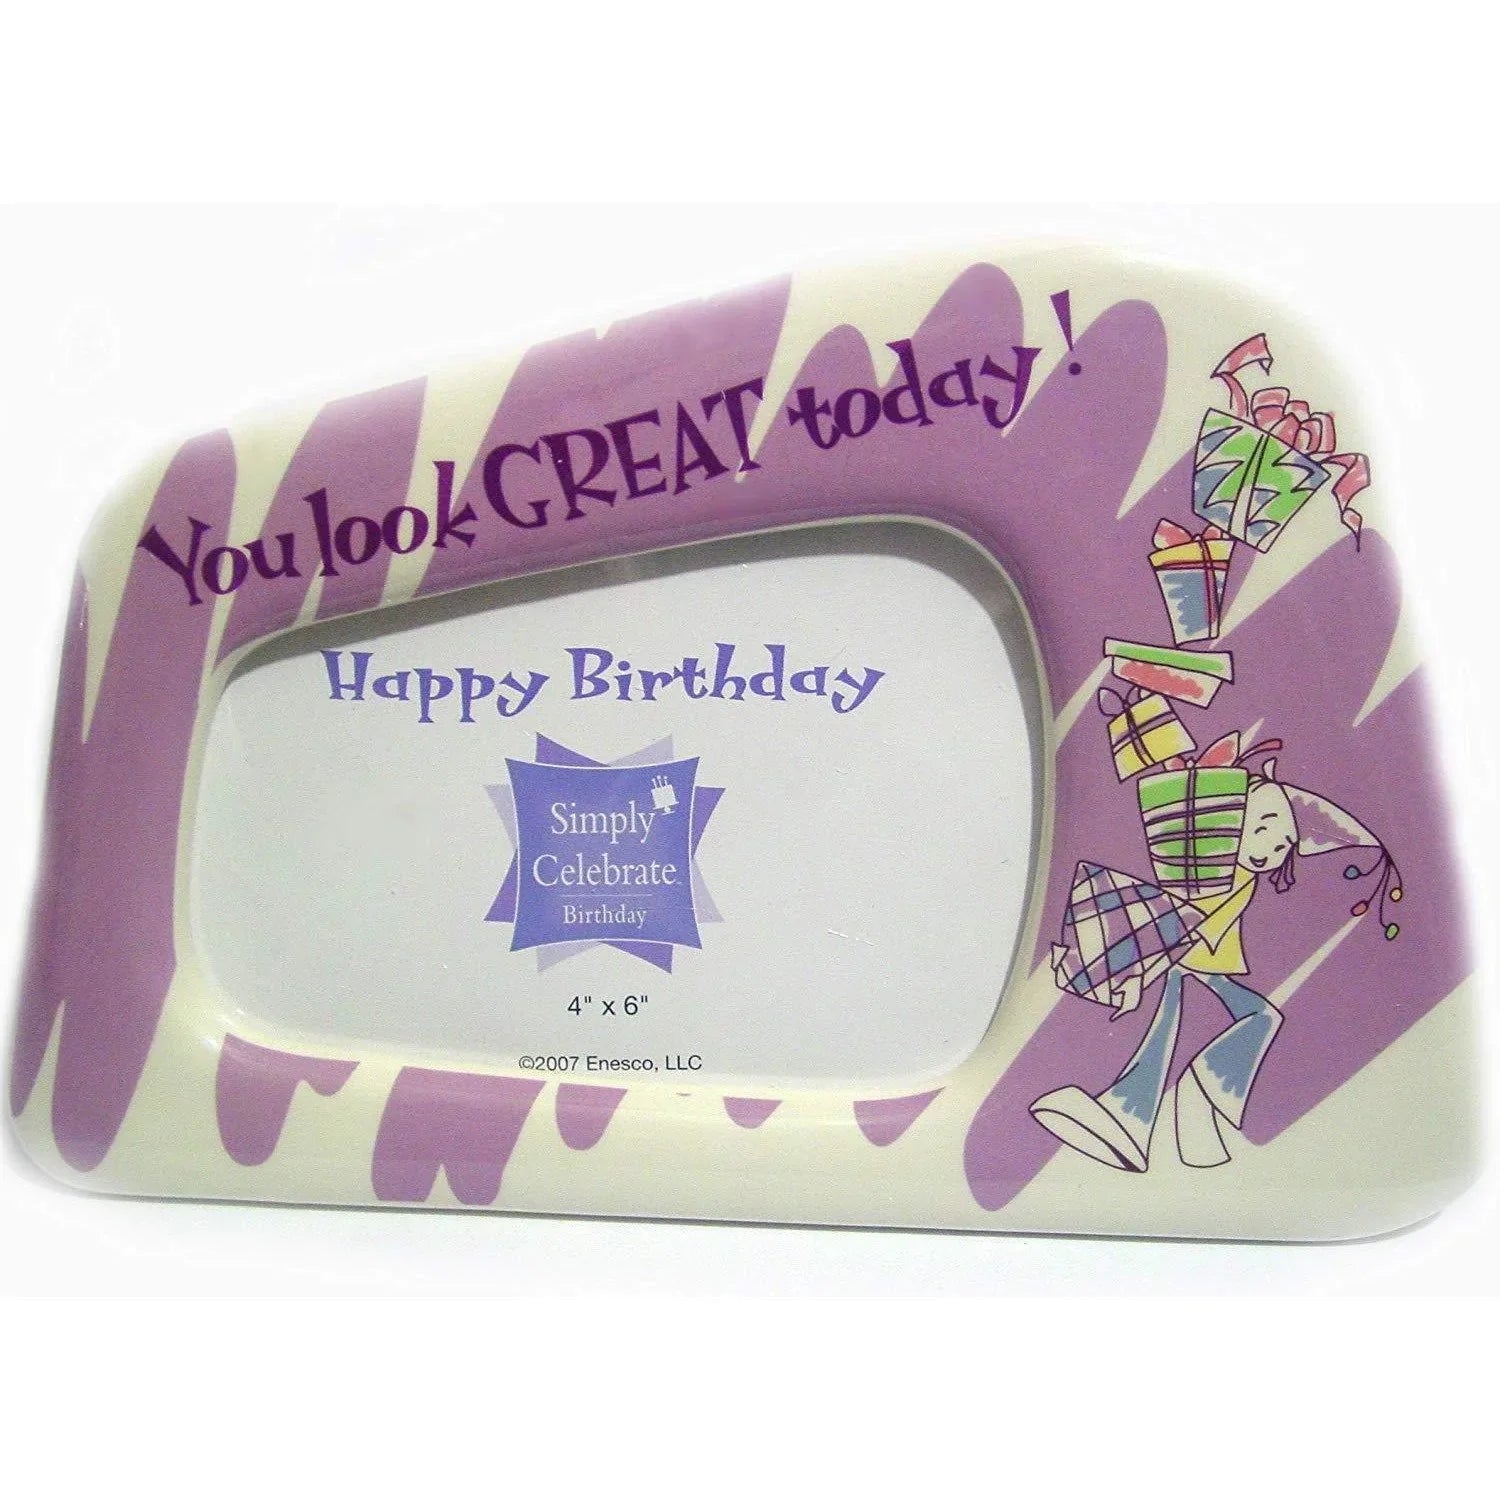 Enesco Furniture 4x6 Ceramic 'You look Great Today' Photo Frame